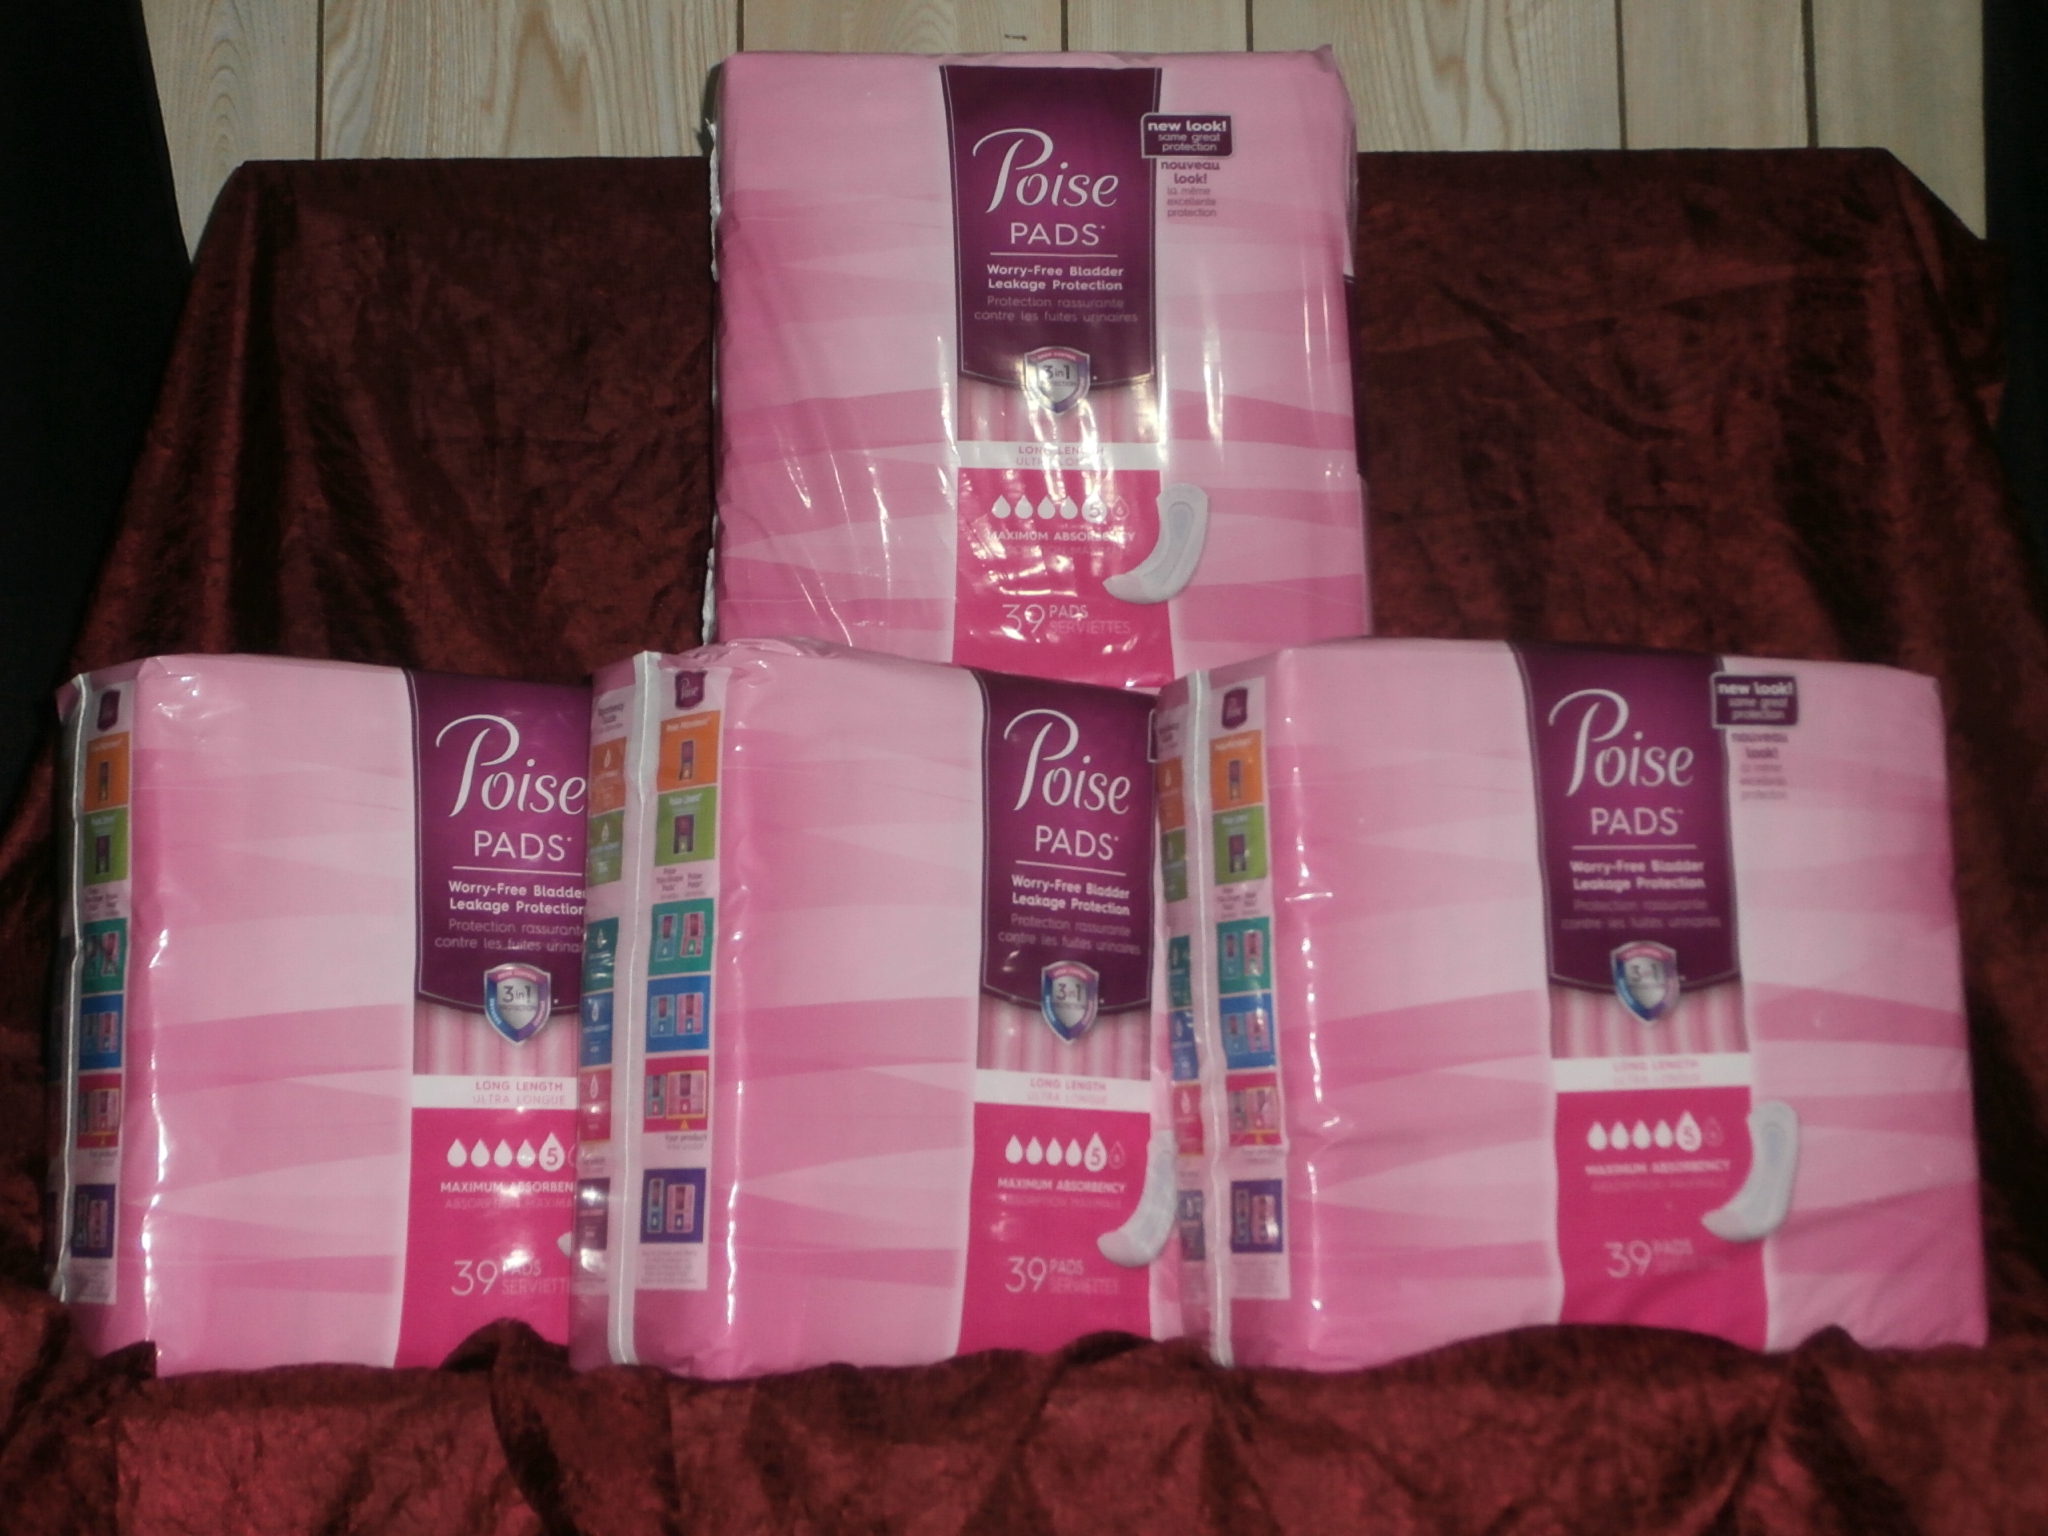 Poise: Comfy, Absorbent and Now I Can #LiveWithoutLeaks @Poise